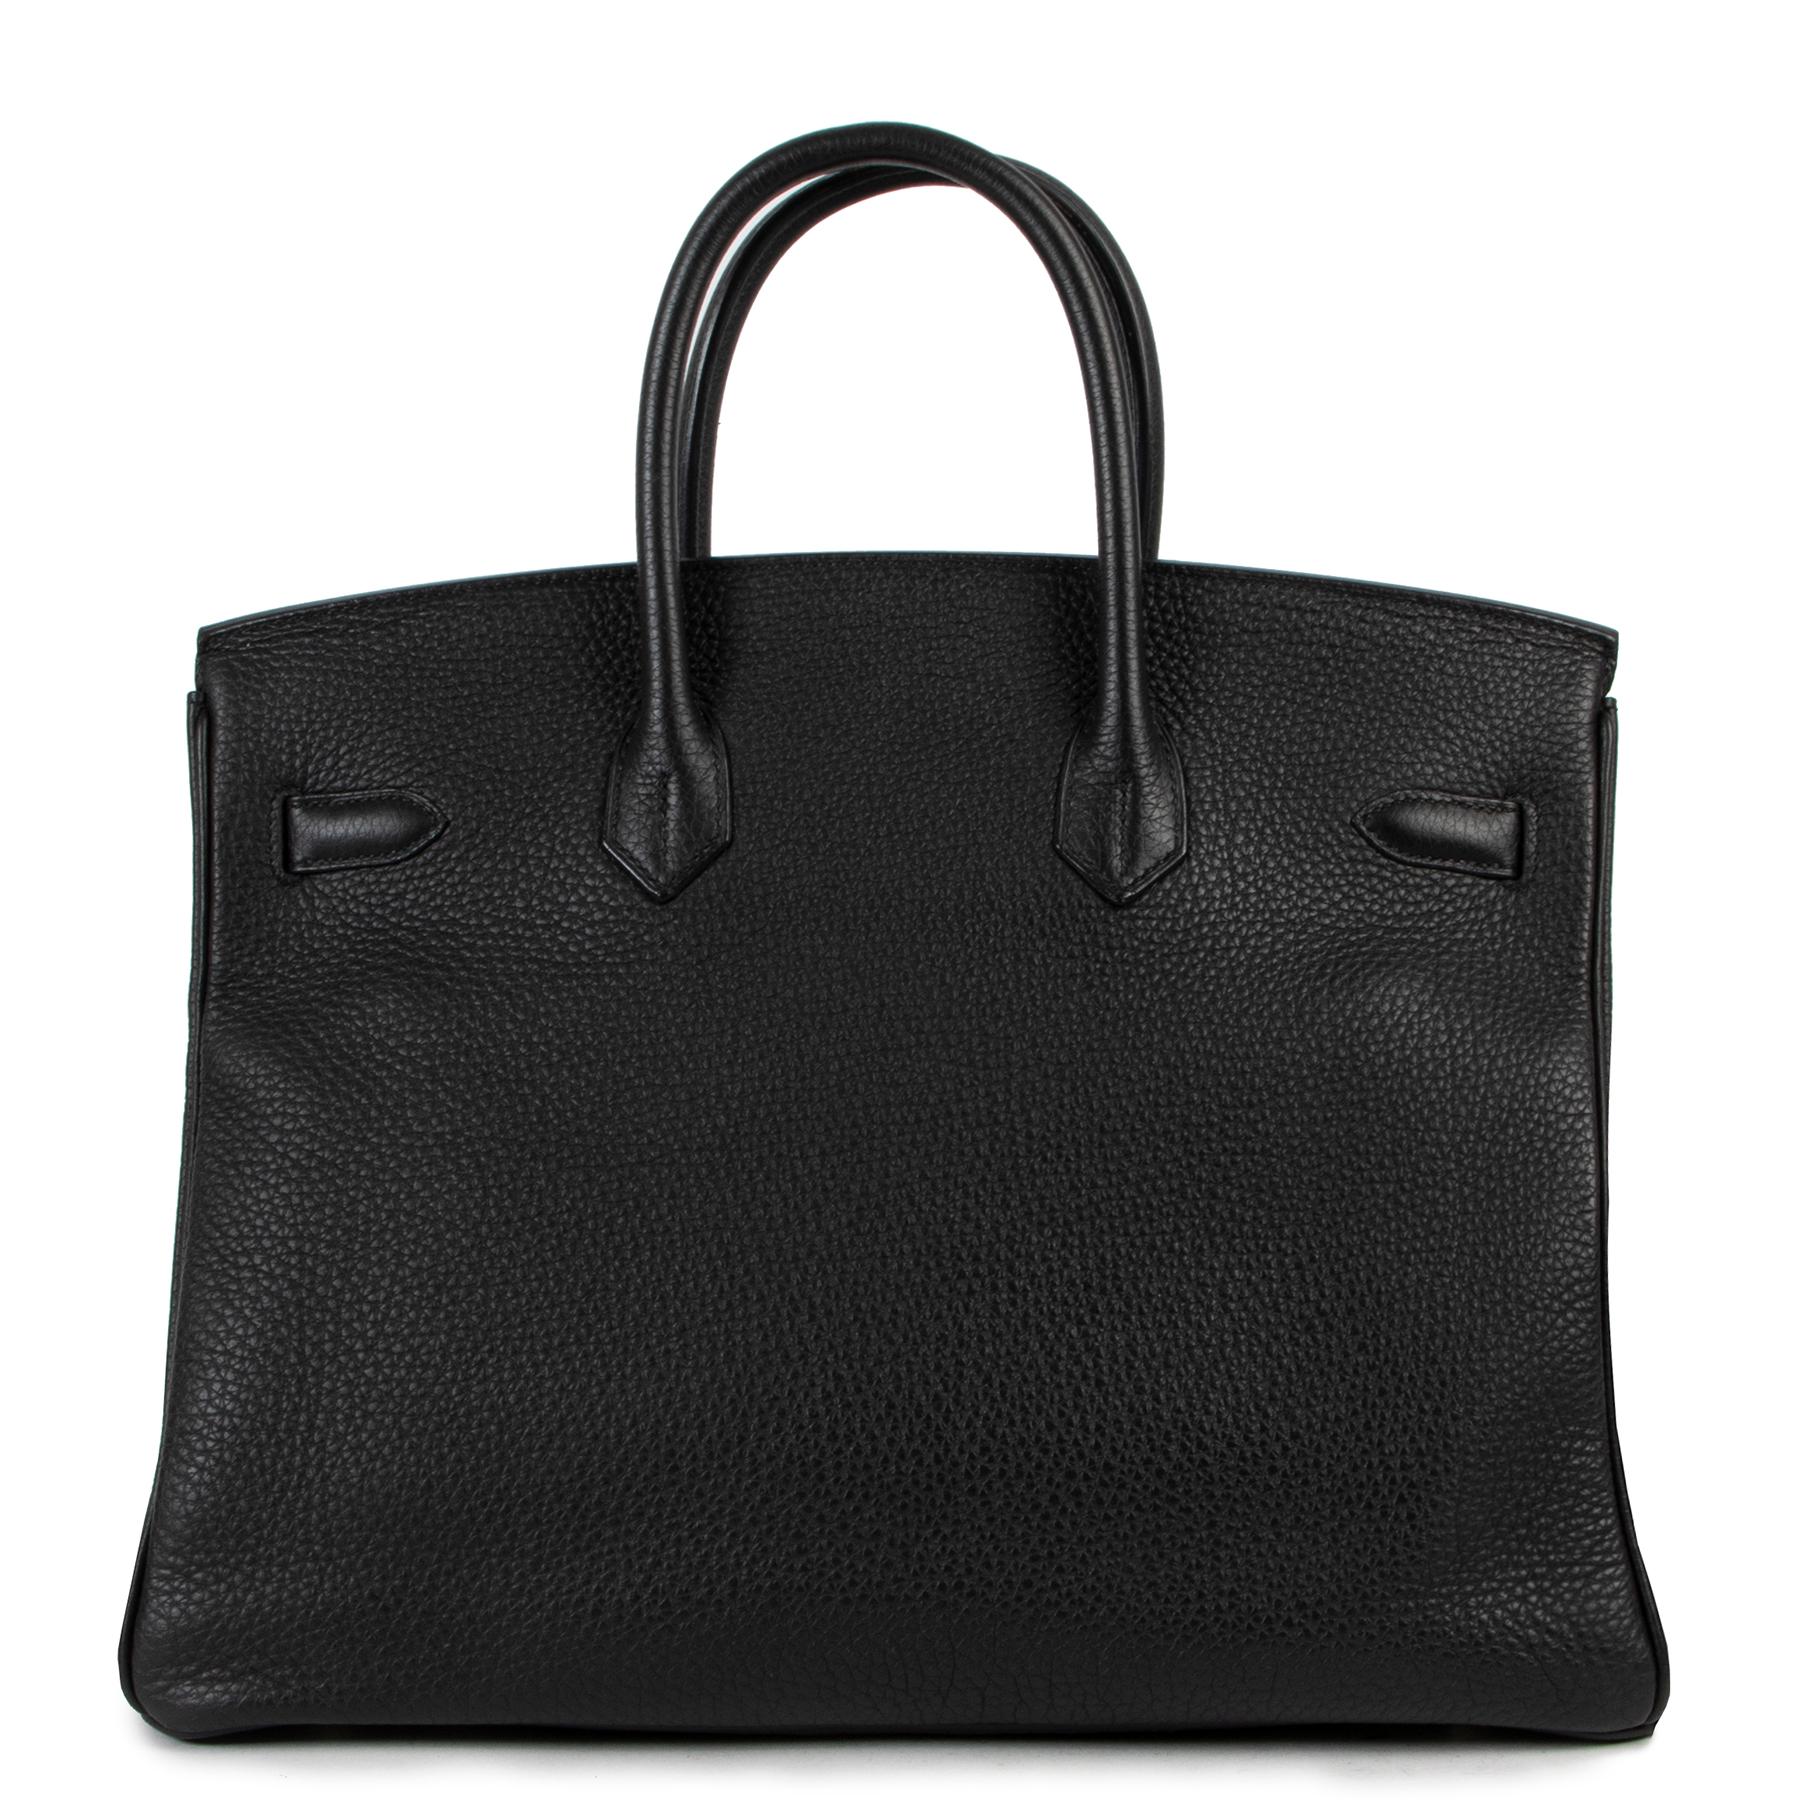 Hermès Birkin 35 Togo Black PHW

This combination of Black togo with palladium silver-toned hardware makes this Hermès Birkin in the size 35 a highly coveted must-have bag! The Hermès Birkin 35 Togo Black PHW is the perfect all-round bag for the